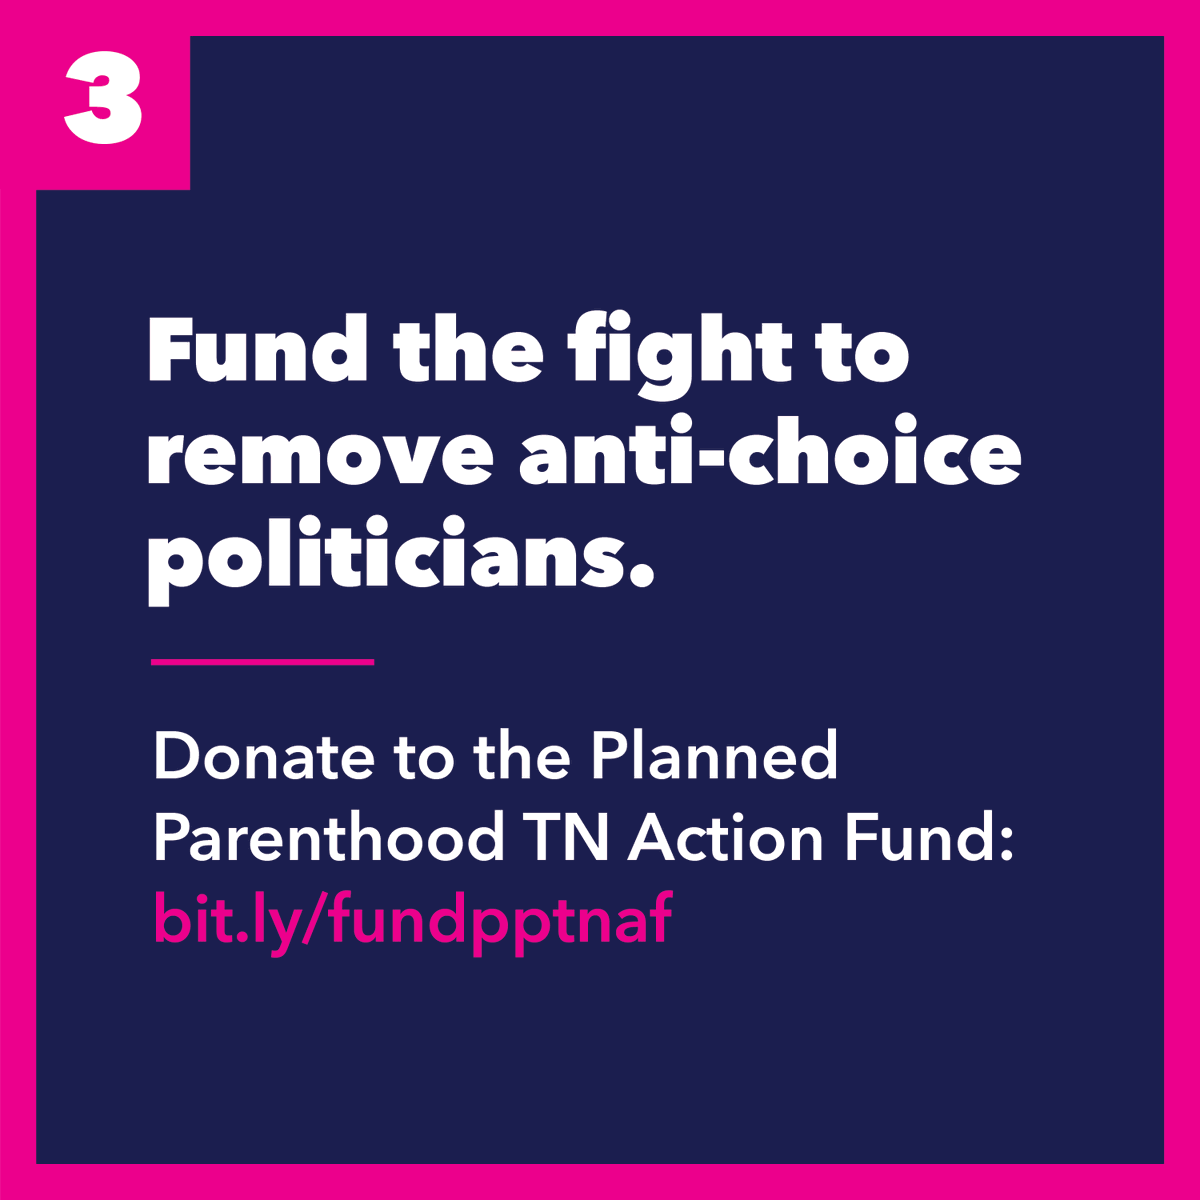 Fund the fight to remove anti-choice politicians. Donate to the Planned Parenthood TN Action Fund:  https://bit.ly/fundpptnaf  (4/6)